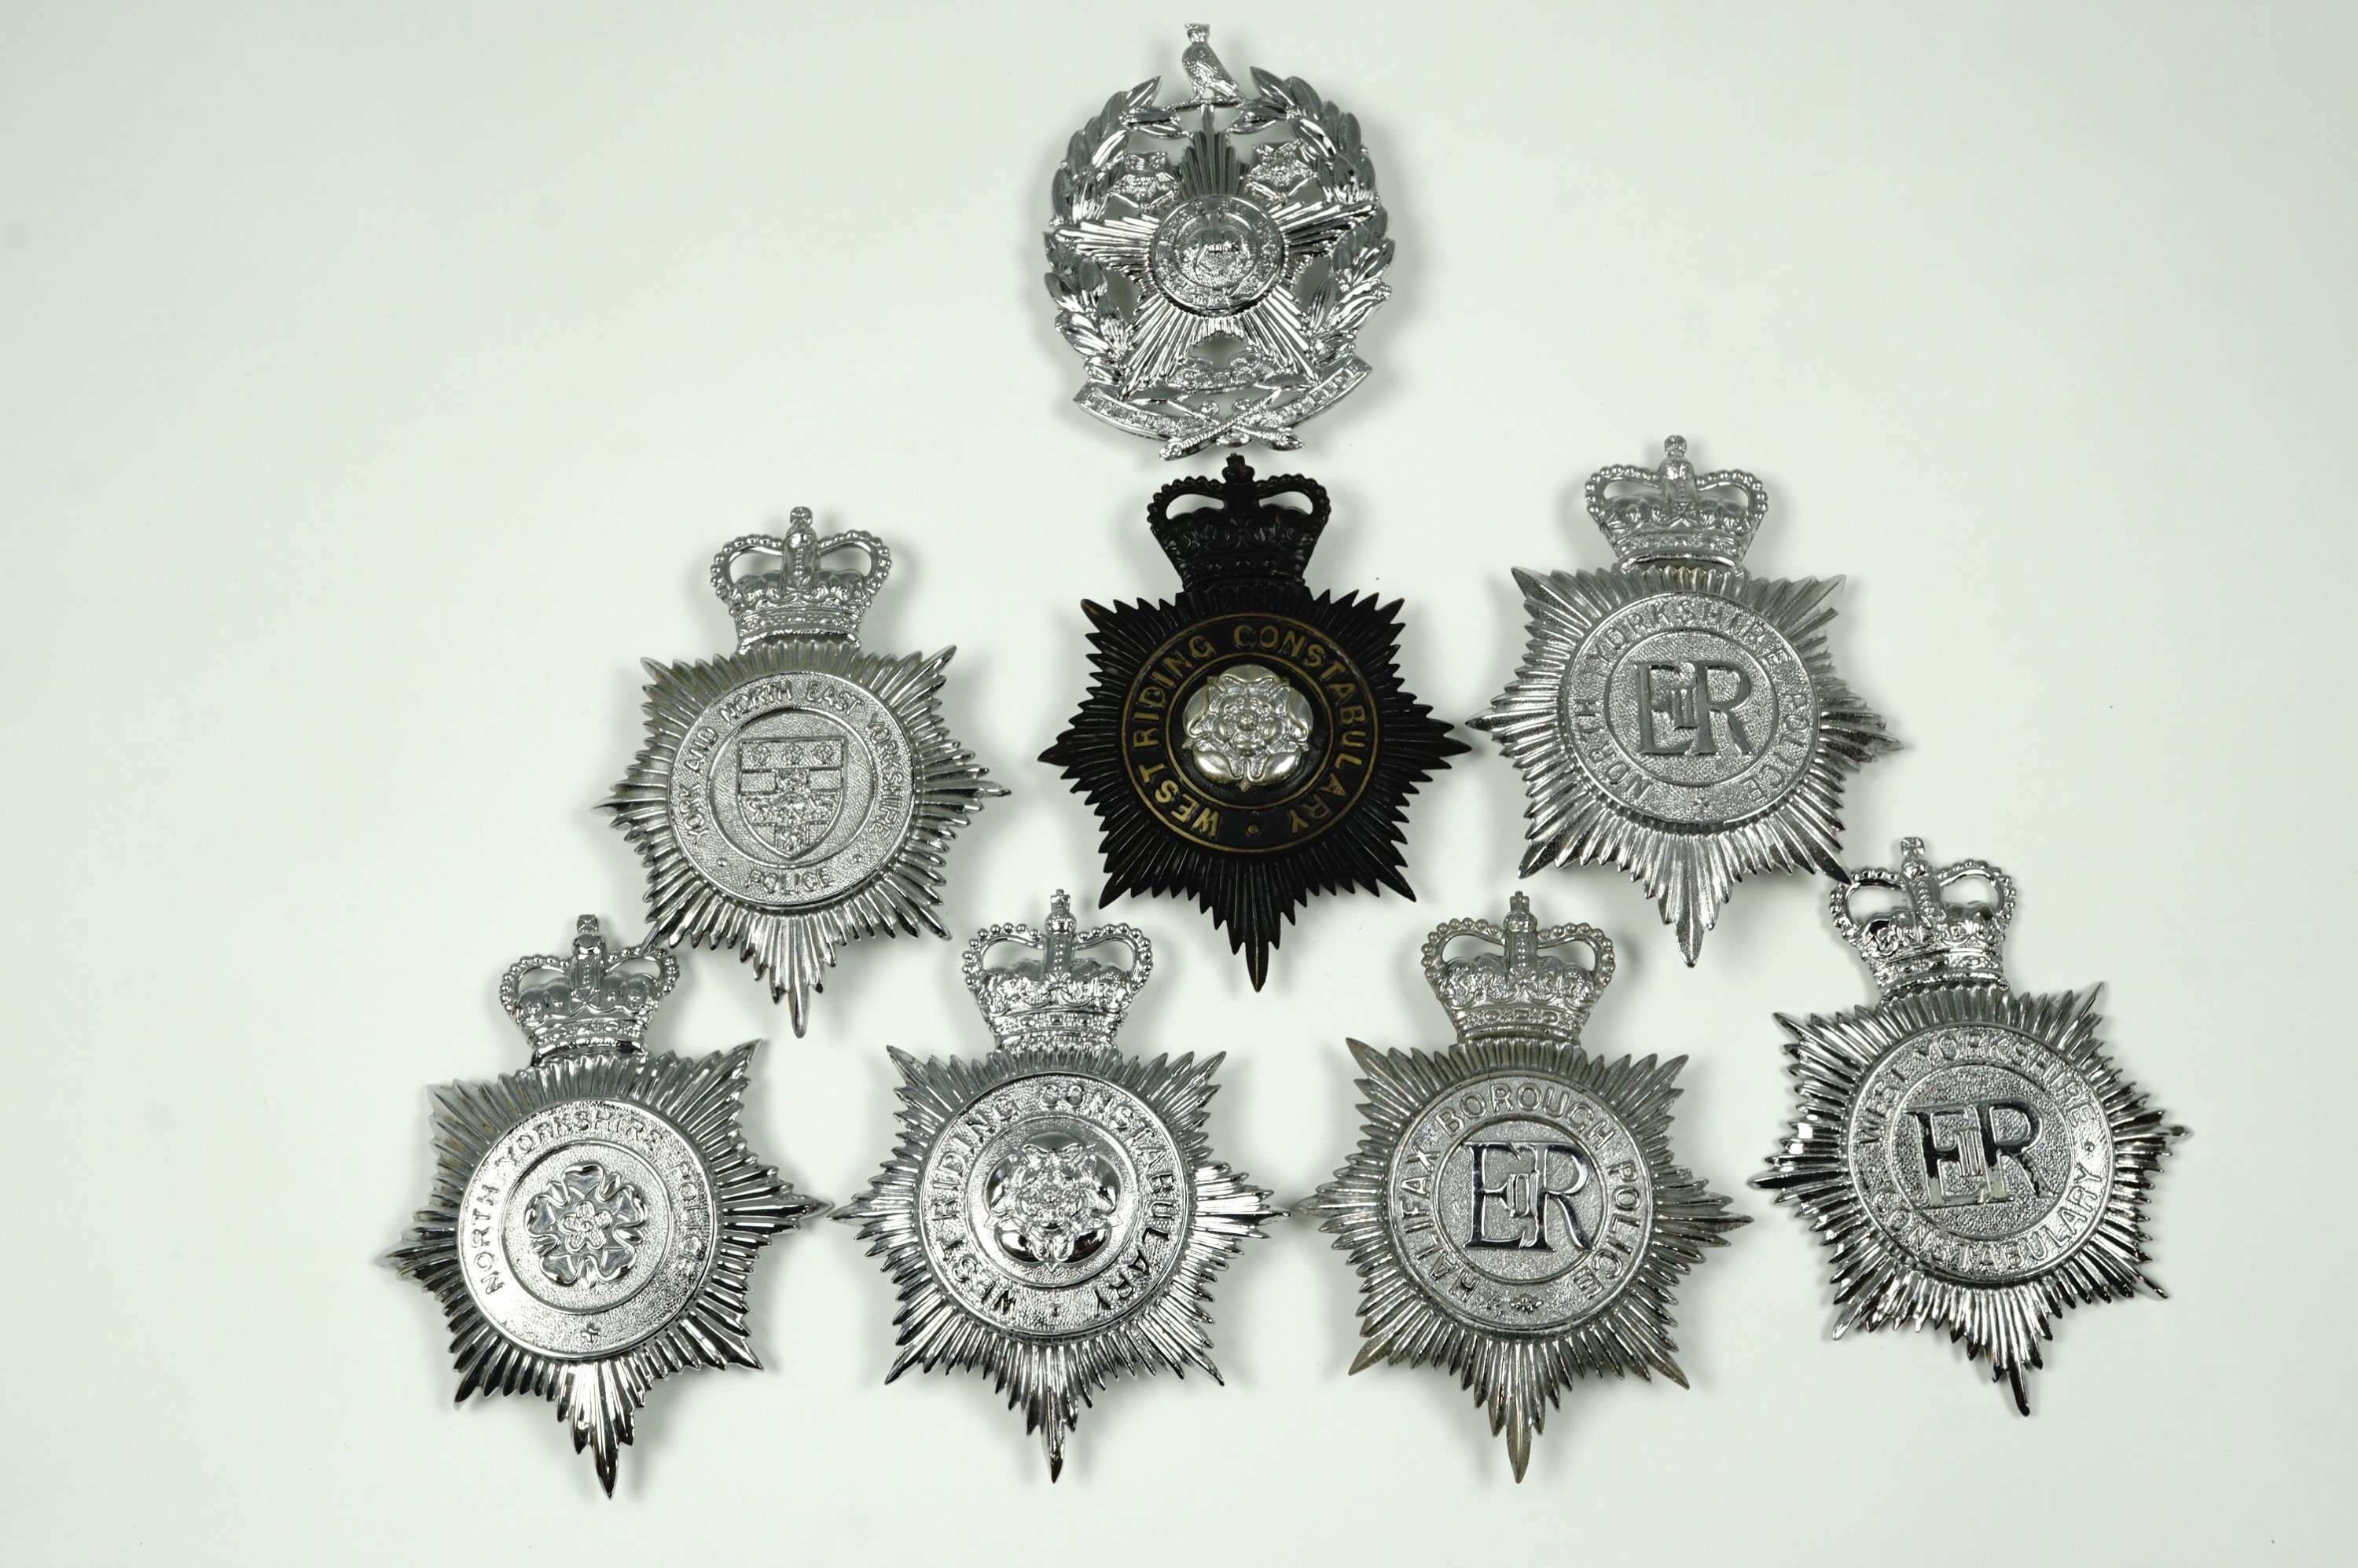 Eight British police helmet plates, Yorkshire police and constabulary, West Riding and Halifax